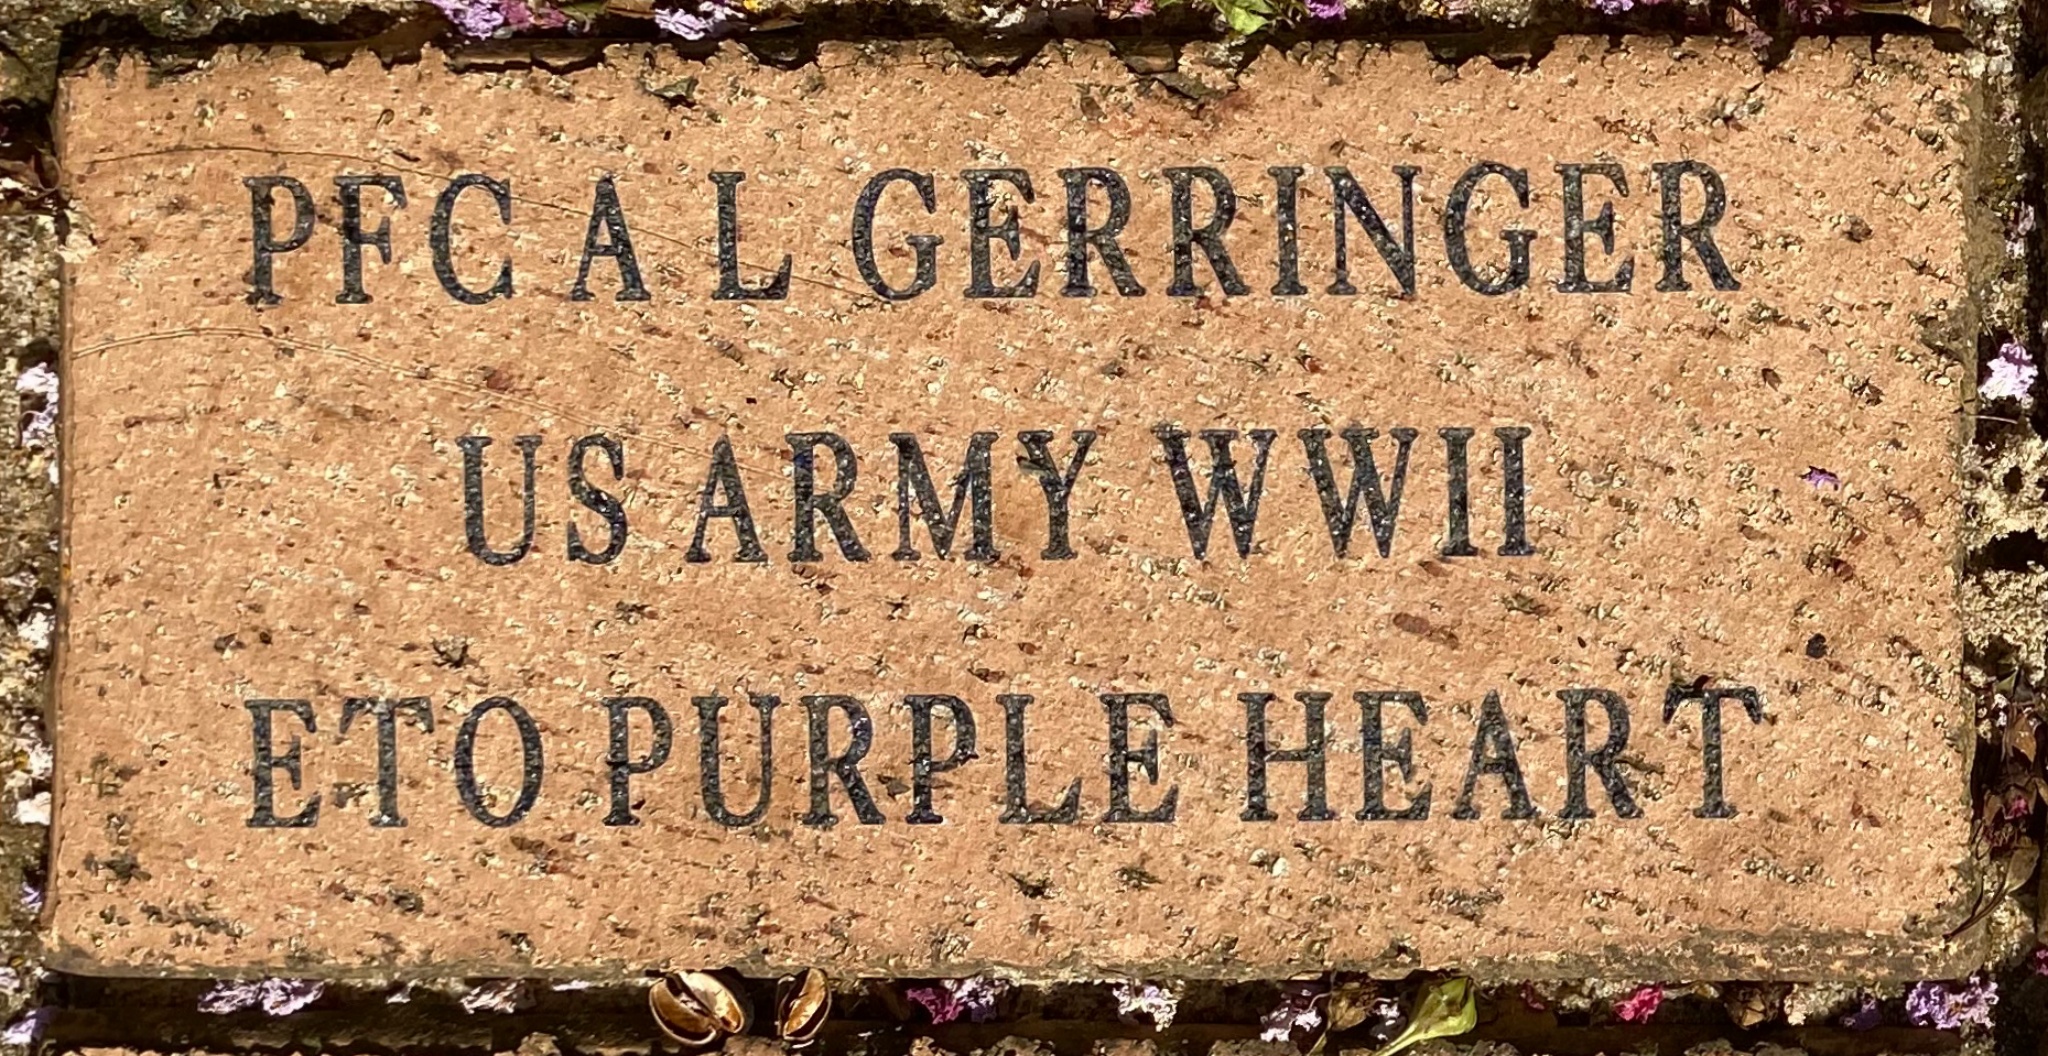 PFC A L GERRINGER US ARMY WWII ETO PURPLE HEART